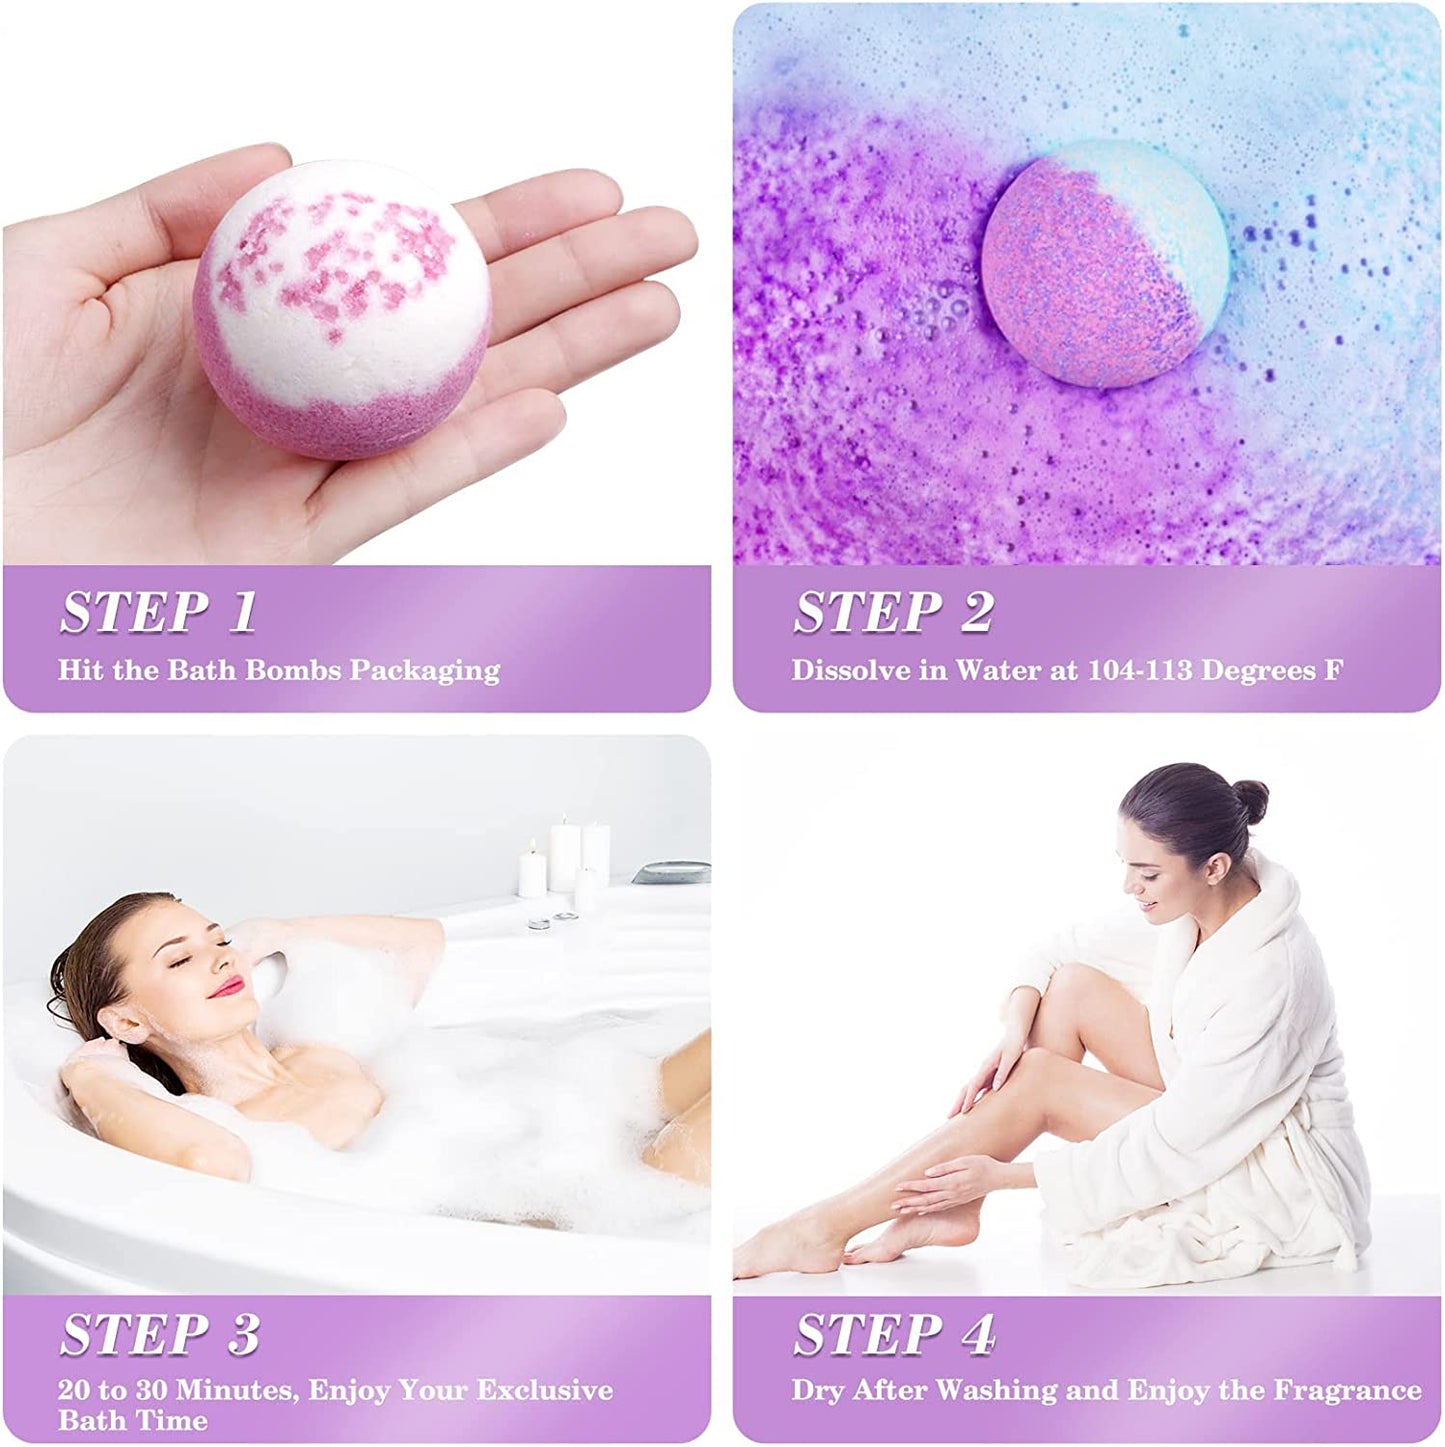 Bath Bombs for Women Gift Set 20Pcs Natural Wonderful Fizz Effect Bath Bomb for Bubble & Spa Bath Amazing Gift for Her/Him, Women, Wife, Girlfriend, Mother